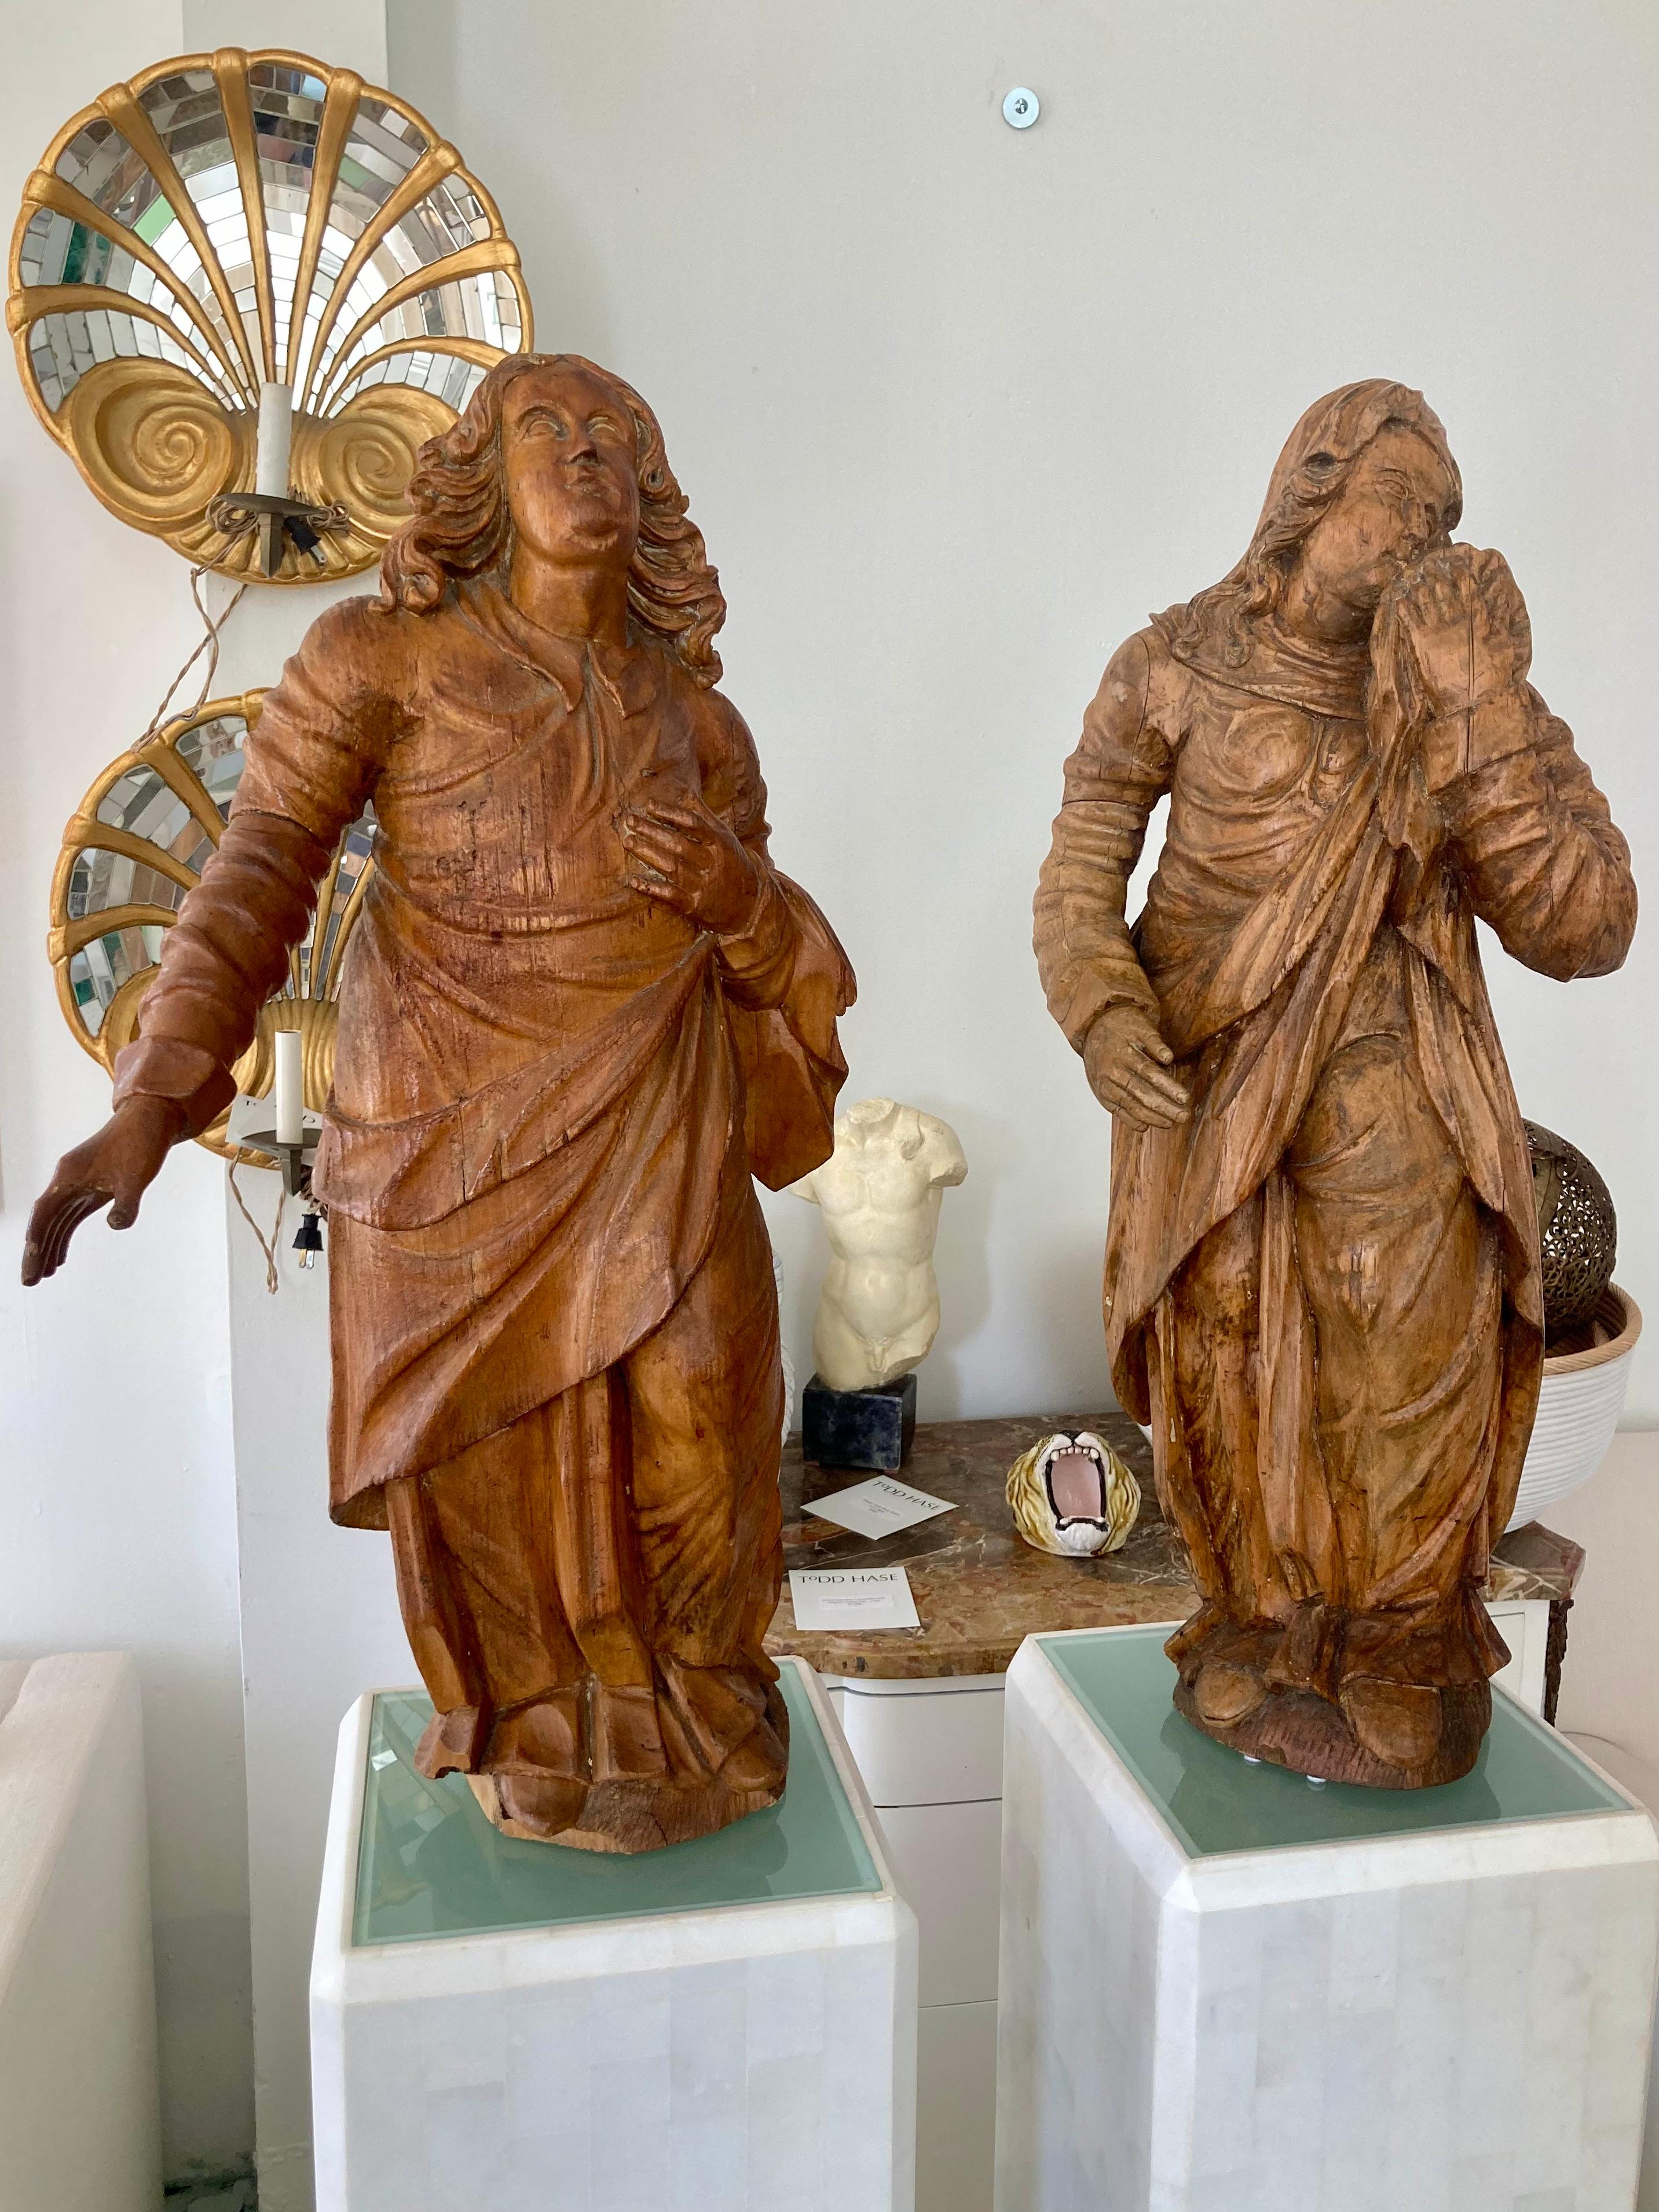 Beautiful pair of French 17th Century Baroque carved wood figural sculptures. Amazing carving details with fabrics and faces being perfectly detailed. Each is made of solid wood in a natural wood tone. Add some classical French Style to your home.